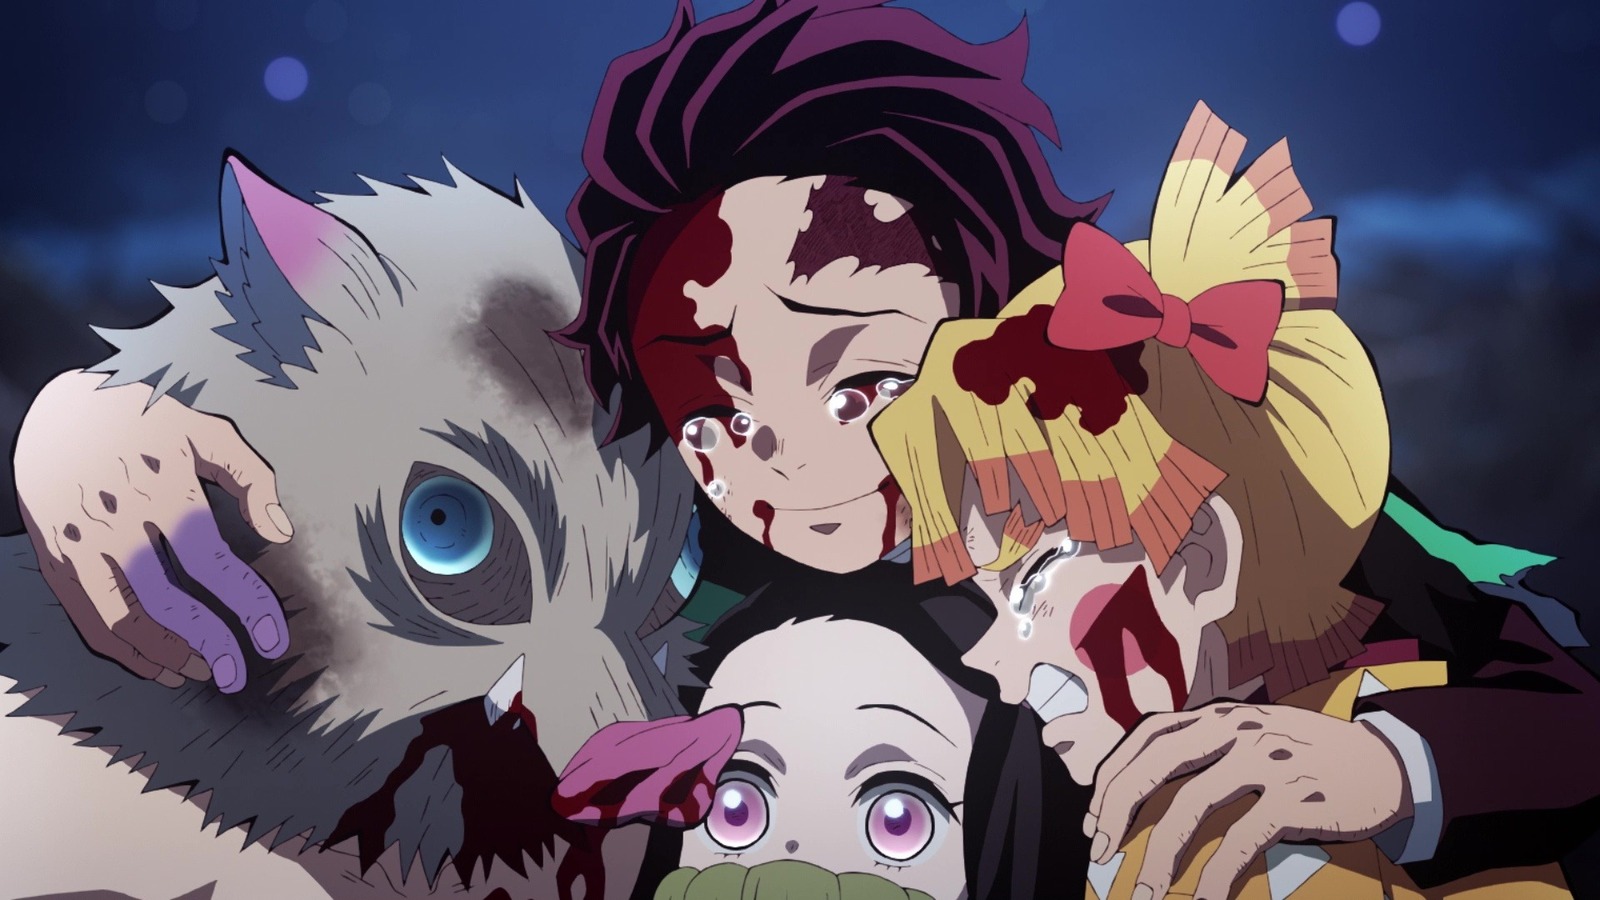 Demon Slayer Season 2 Episode 3 - What Are You? Review